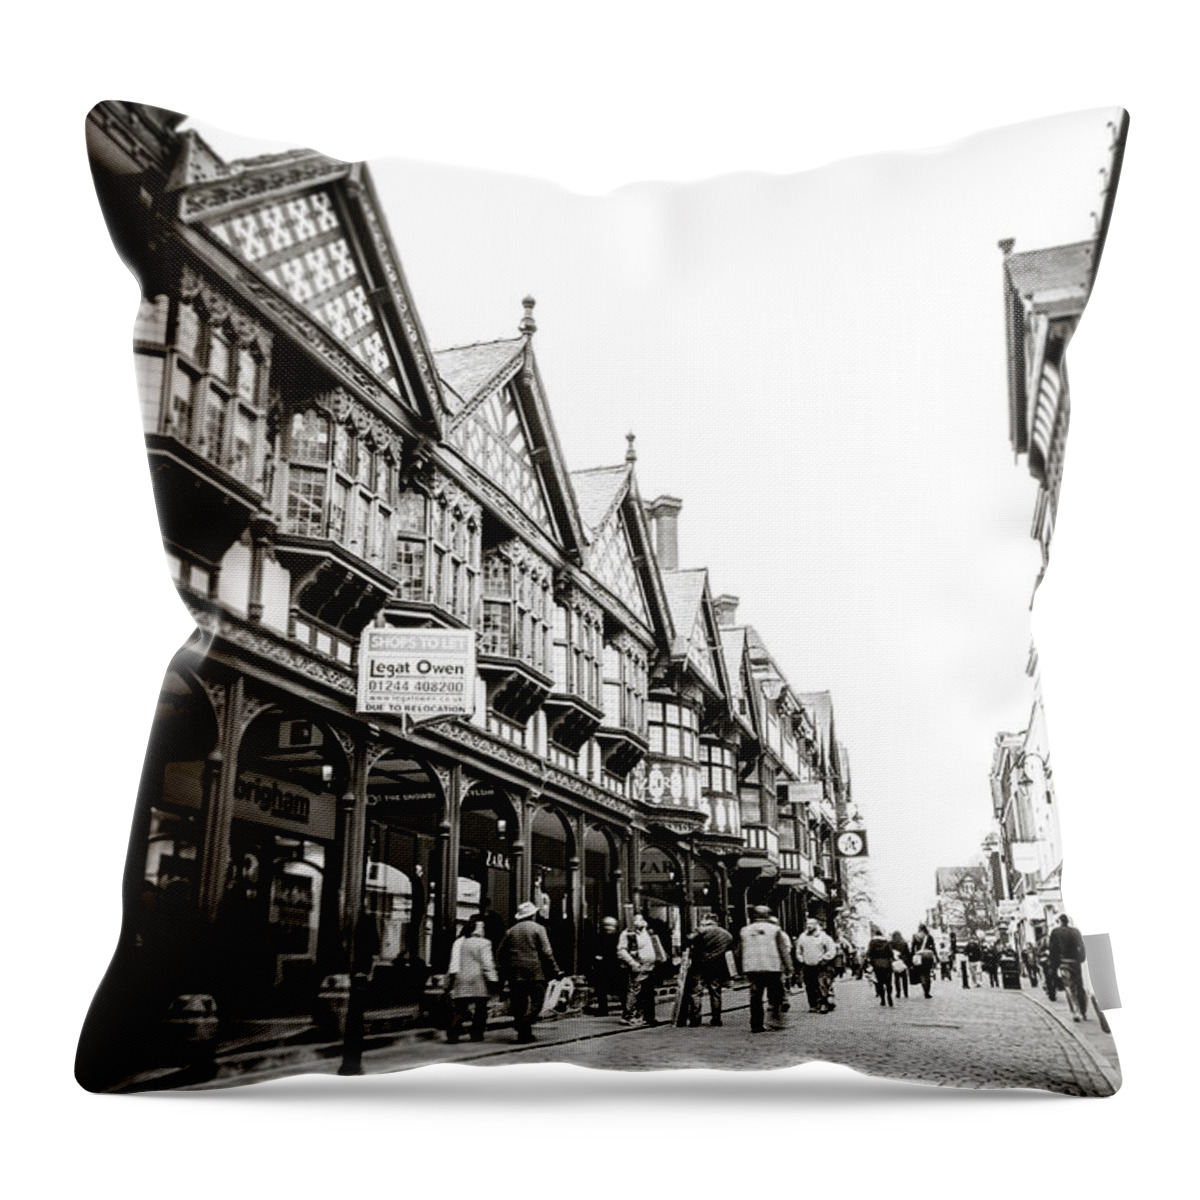 Black And White Throw Pillow featuring the photograph Legat and Owen by Spikey Mouse Photography